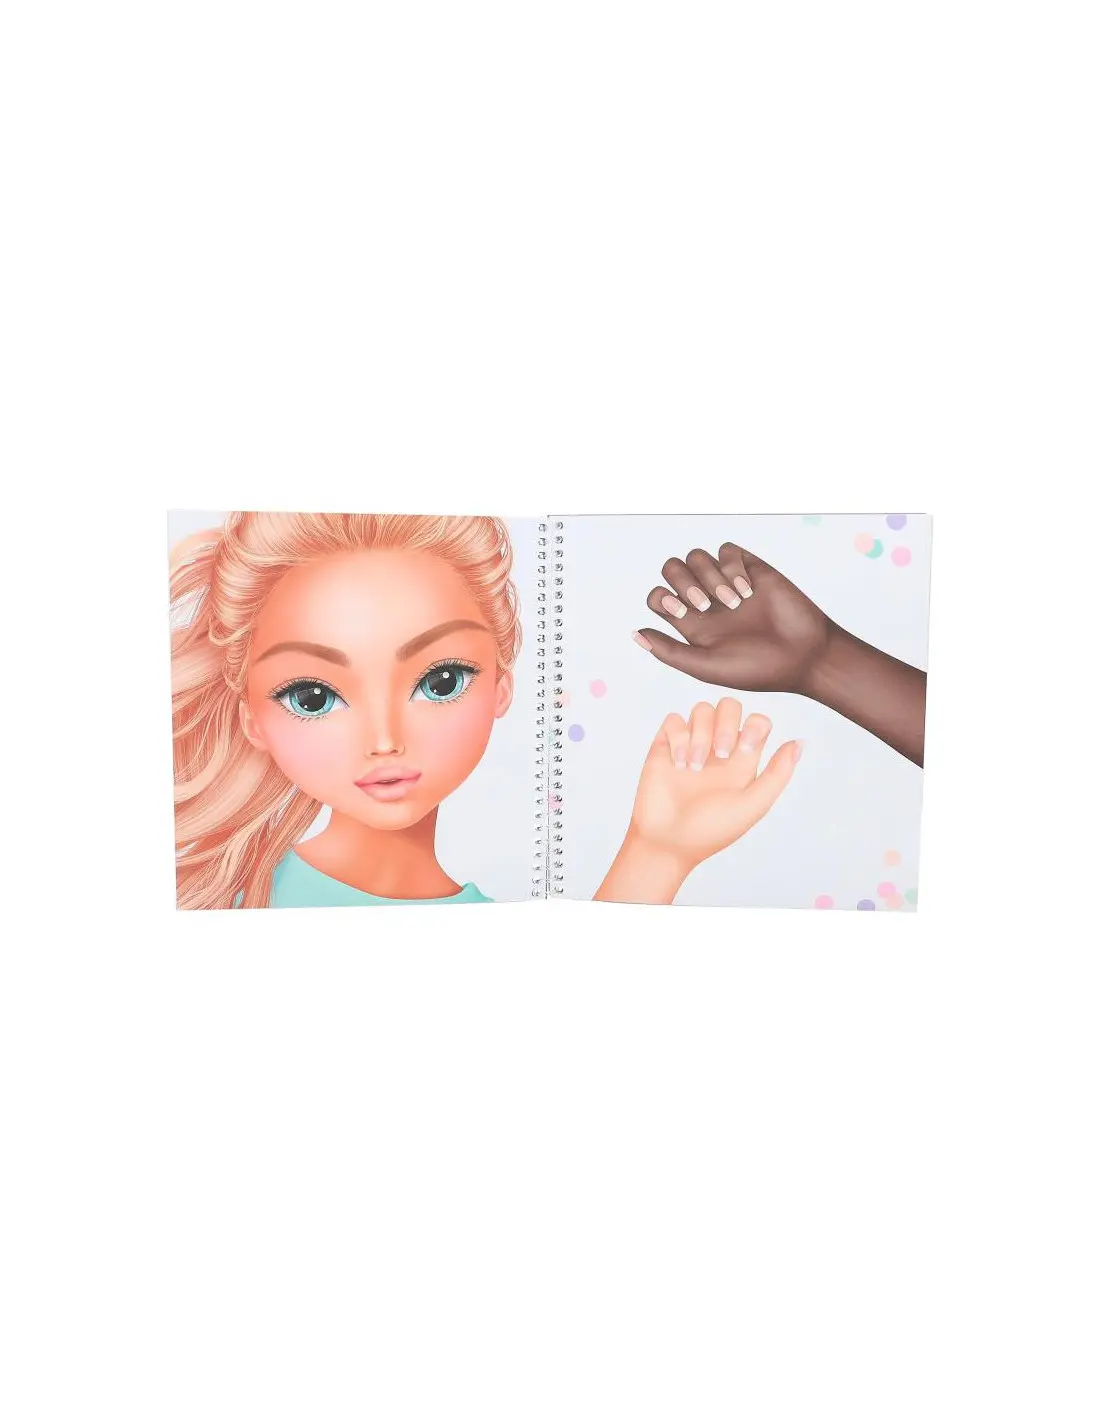 TOPMODEL STYLE ME UP FACE STICKERSBOK FACE & NAILS – NORA & KATIE